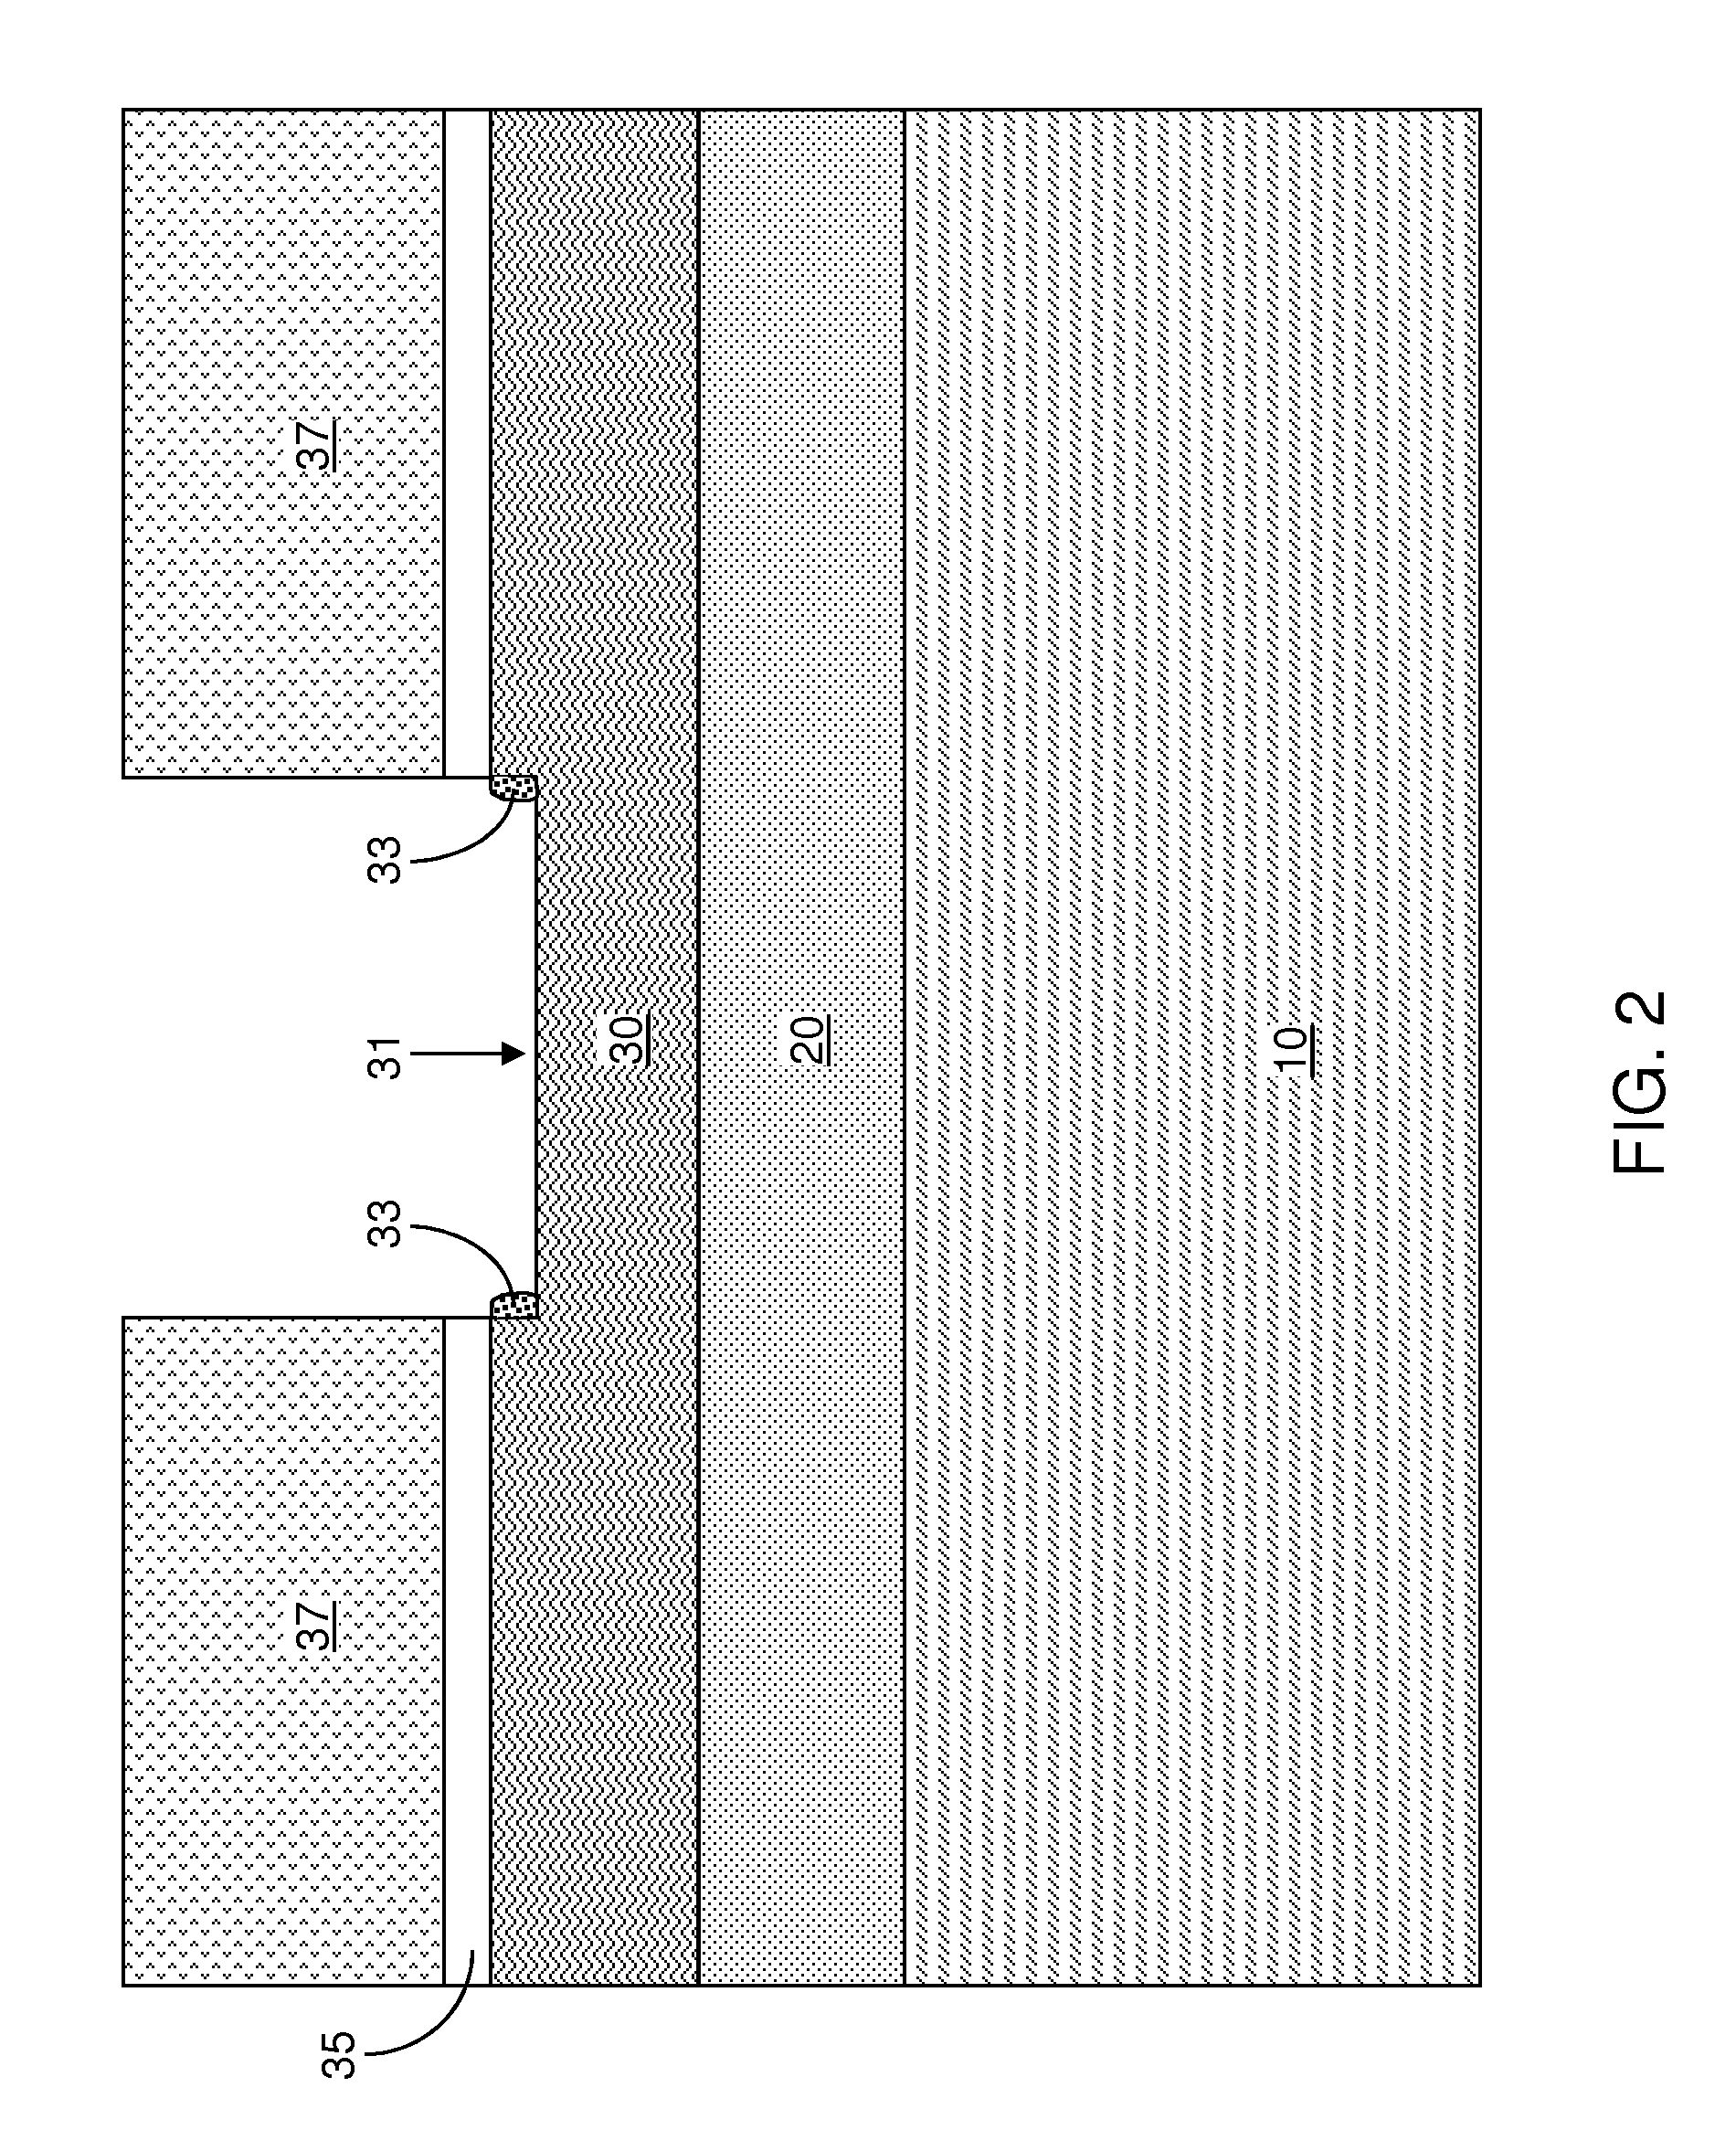 High fidelity patterning employing a fluorohydrocarbon-containing polymer